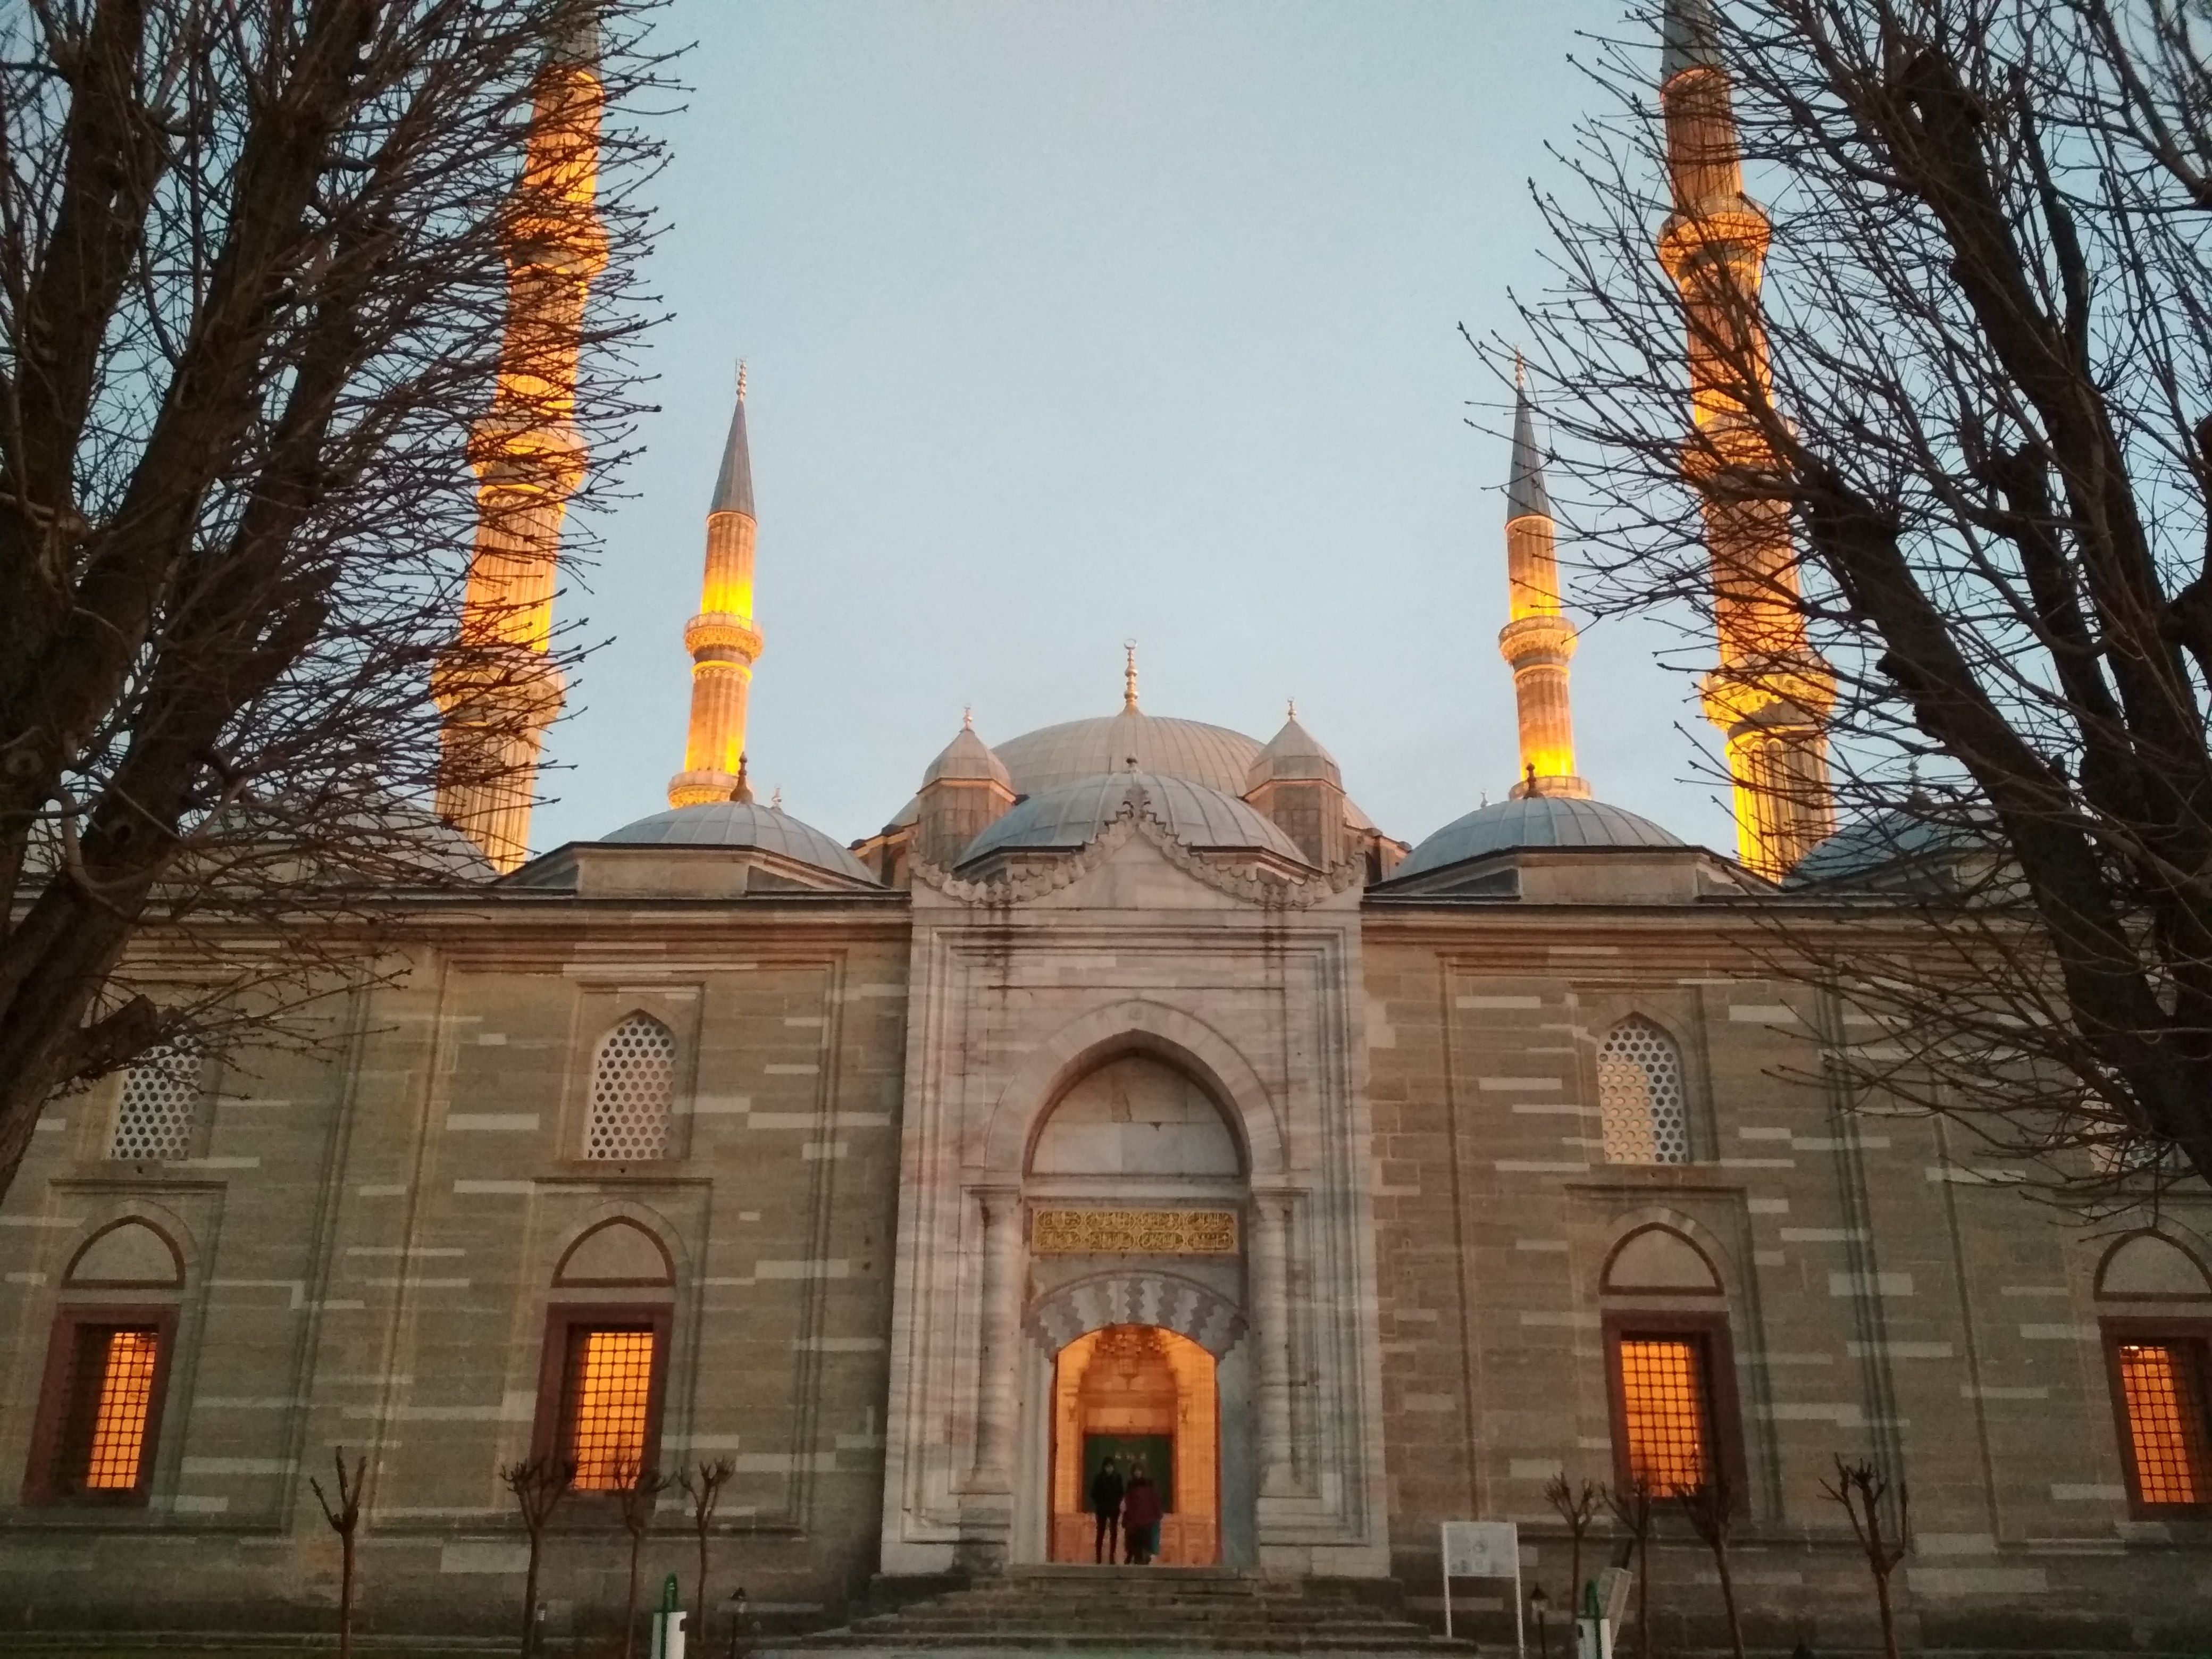 Caption: A photo of the side facade of the Suleymaniye Mosque in Edirne, Turkey, lit up in orange lights at dusk. (Local Guide @DeniGu)